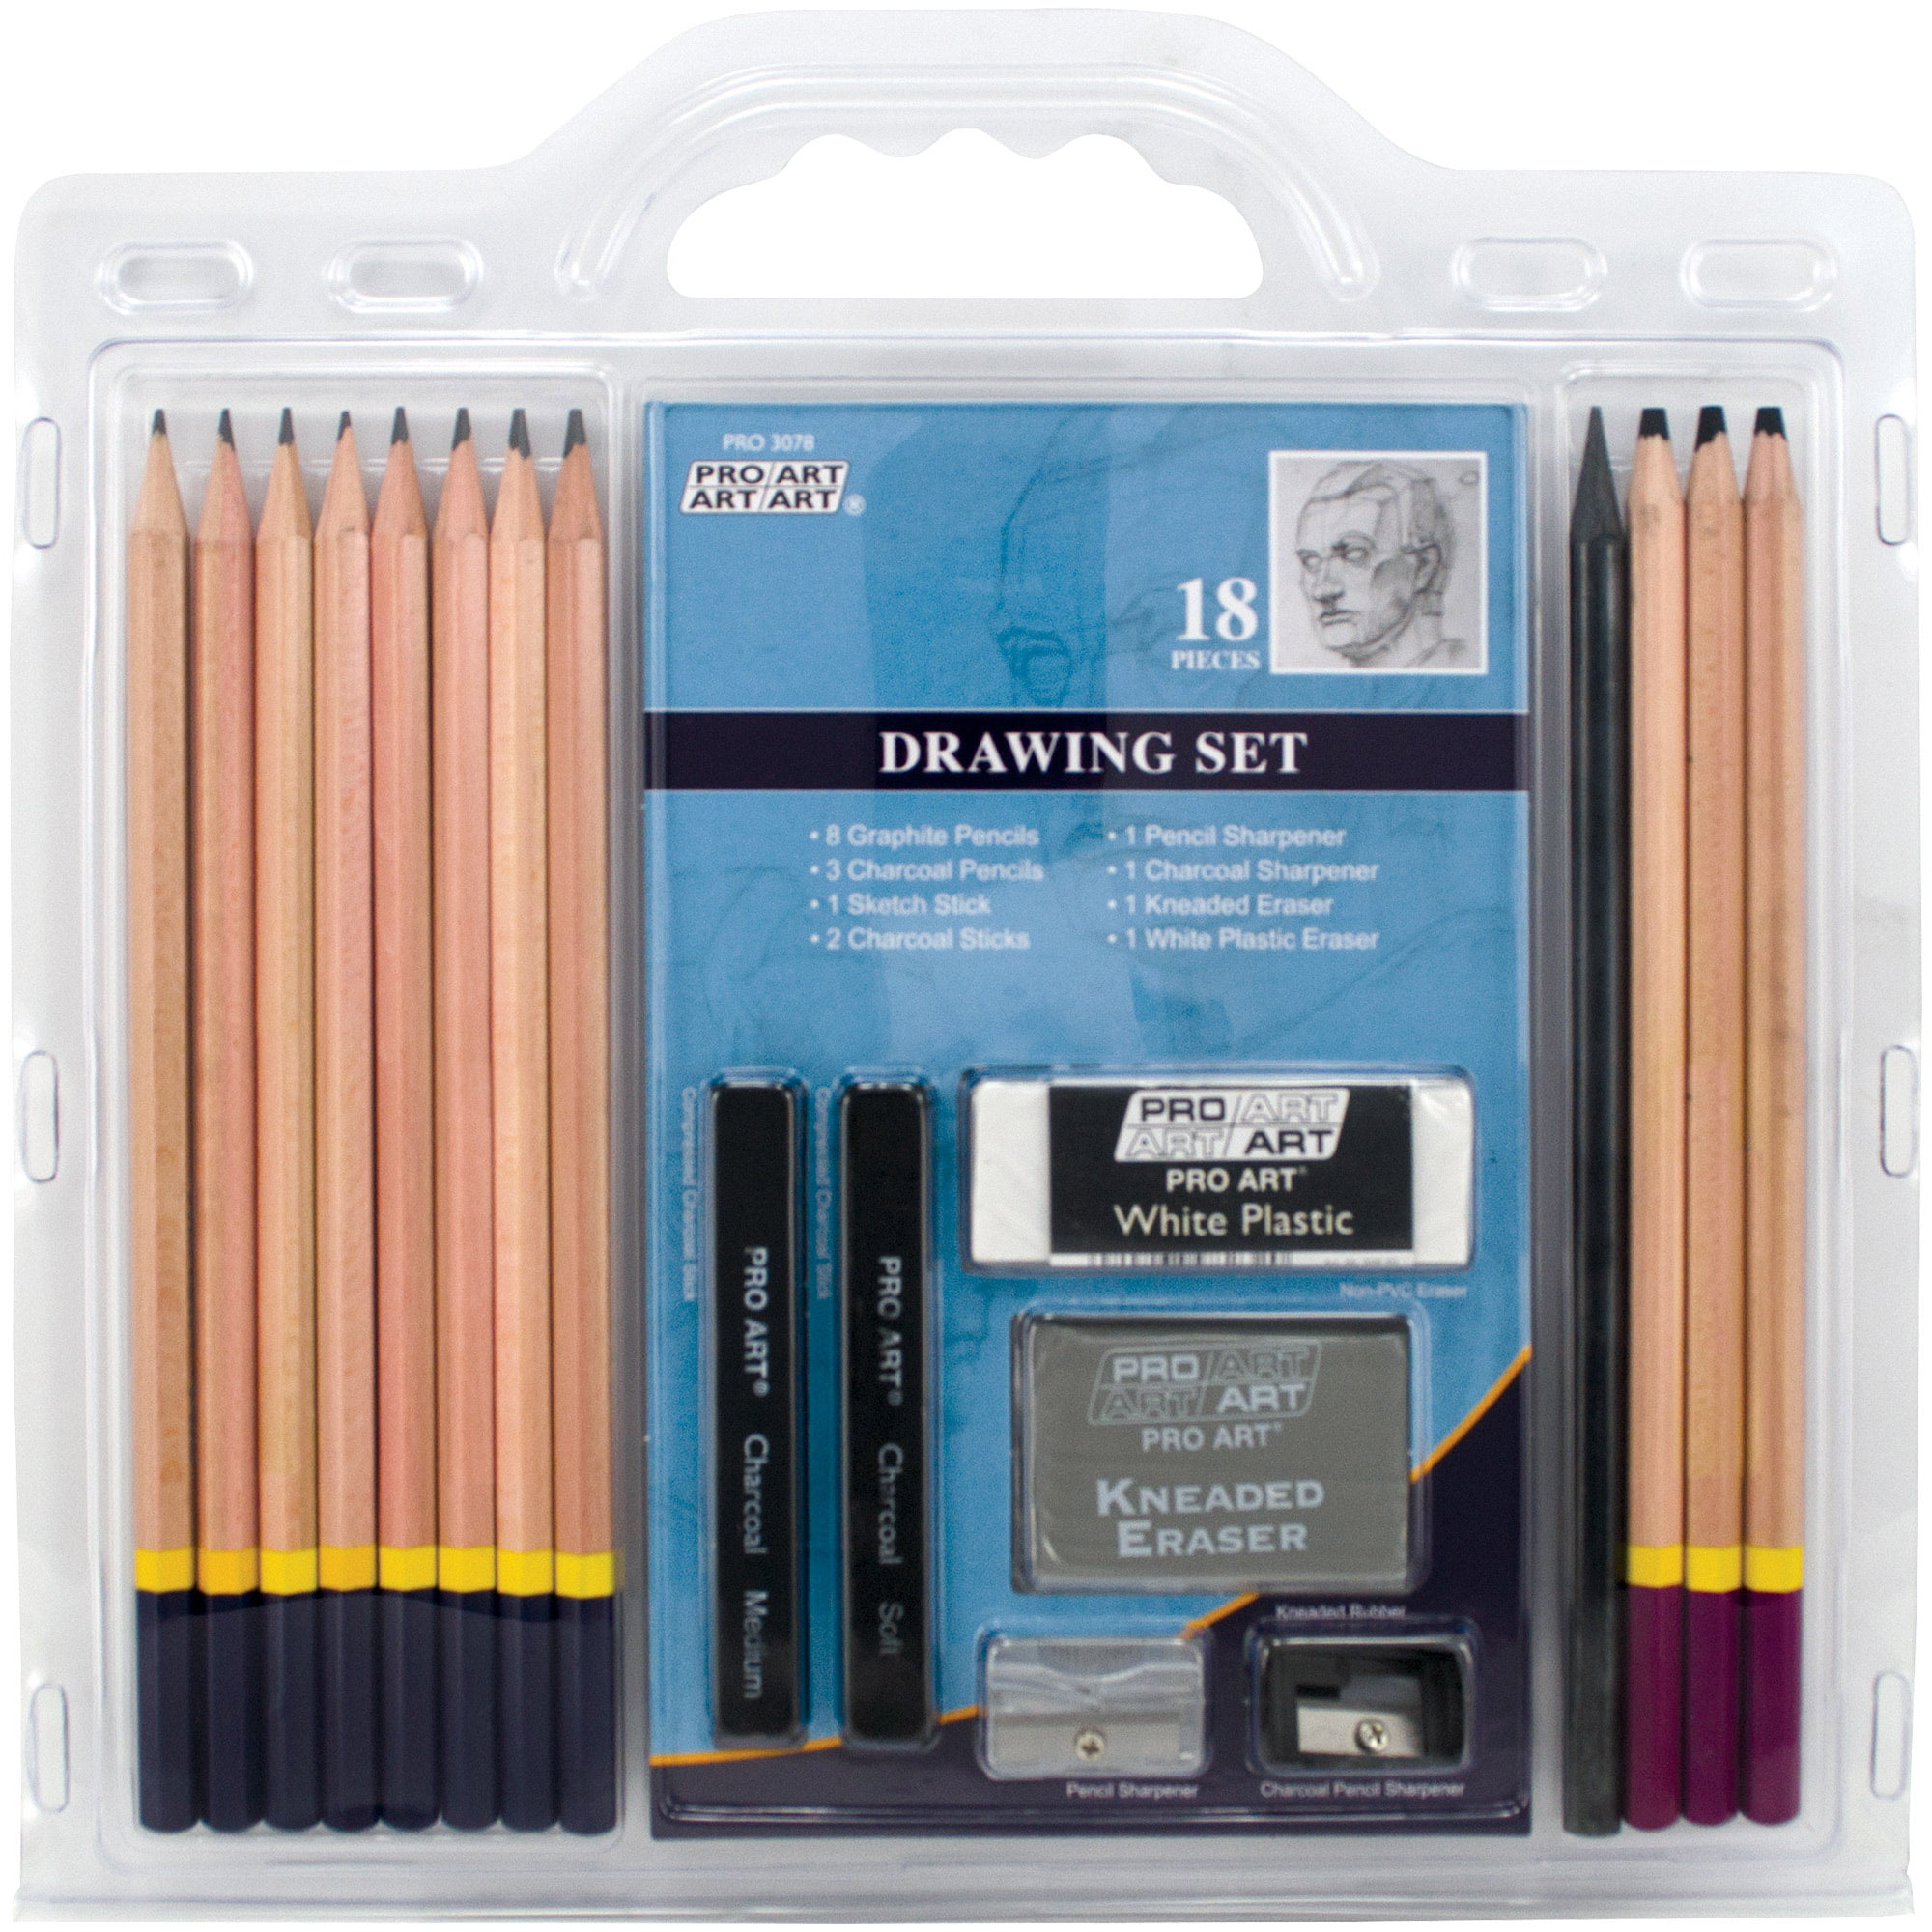 30pcs Charcoal Pencils Set Drawing Pencils Art Sketching for Kids Adults Sketching Pencil Set Beginners and Professional